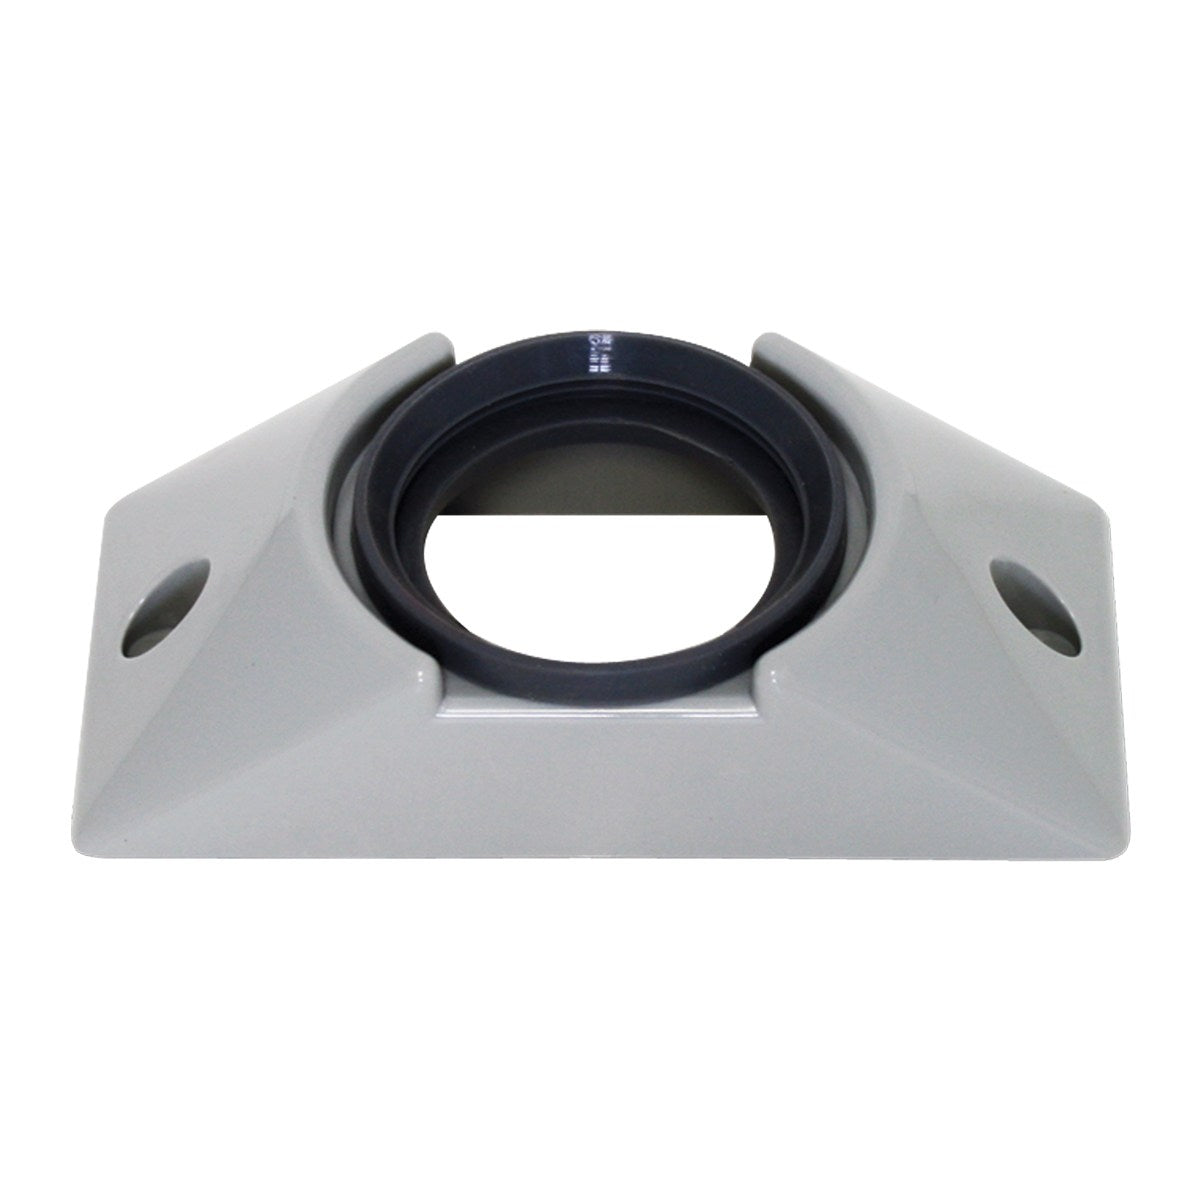 MOUNTING BRACKET WITH GROMMET FOR 2″ ROUND LIGHT